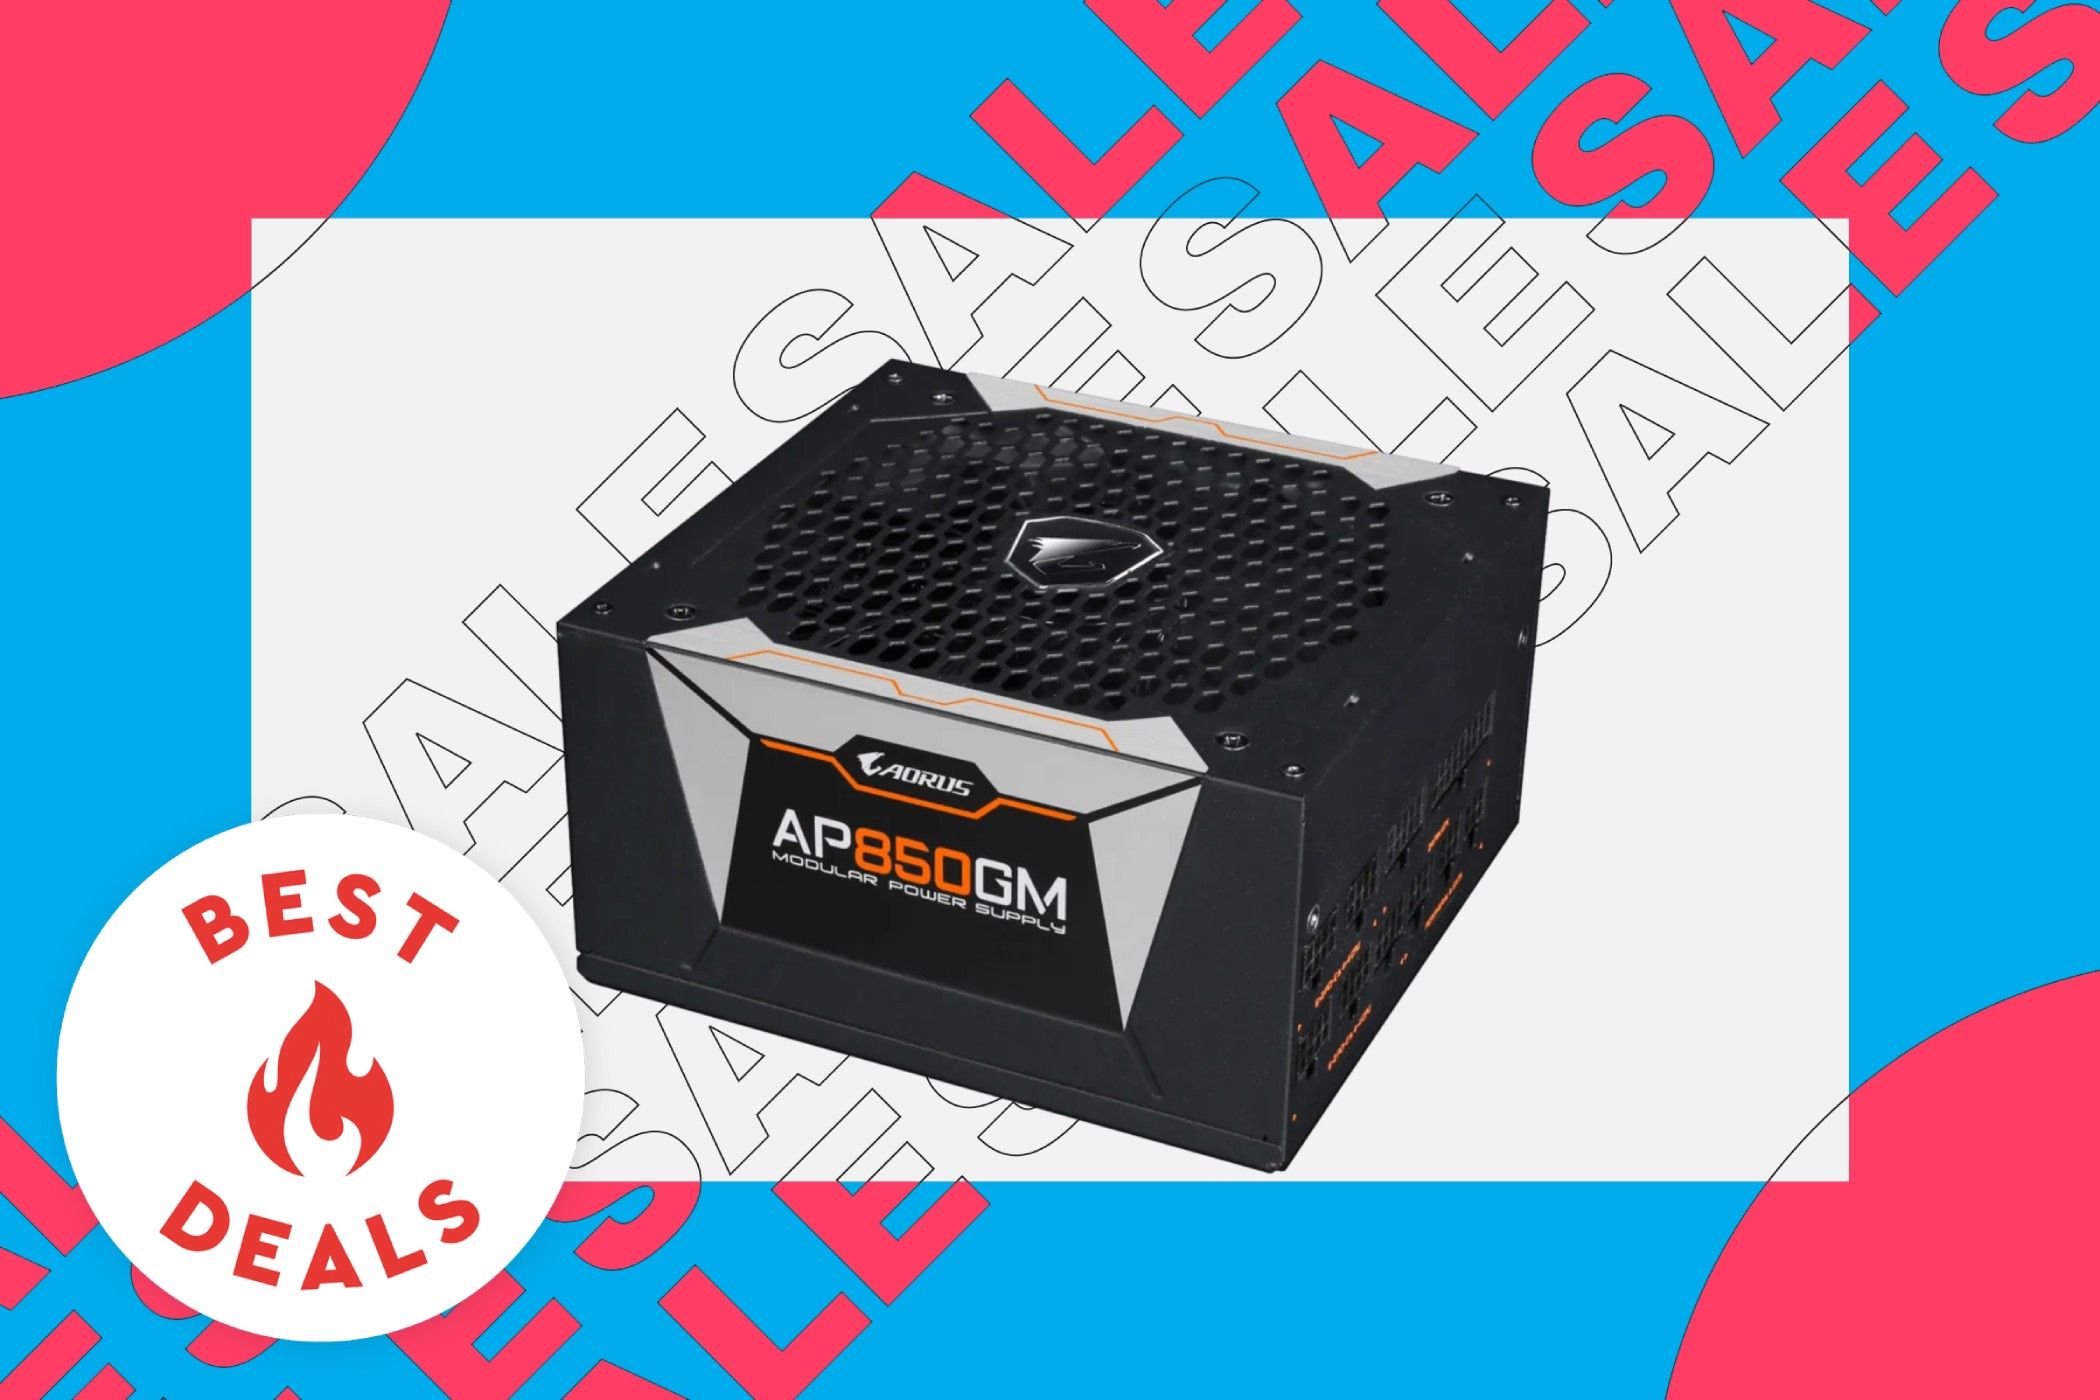 Gigabyte Aorus P850W Cyber Monday 2022 deal featured